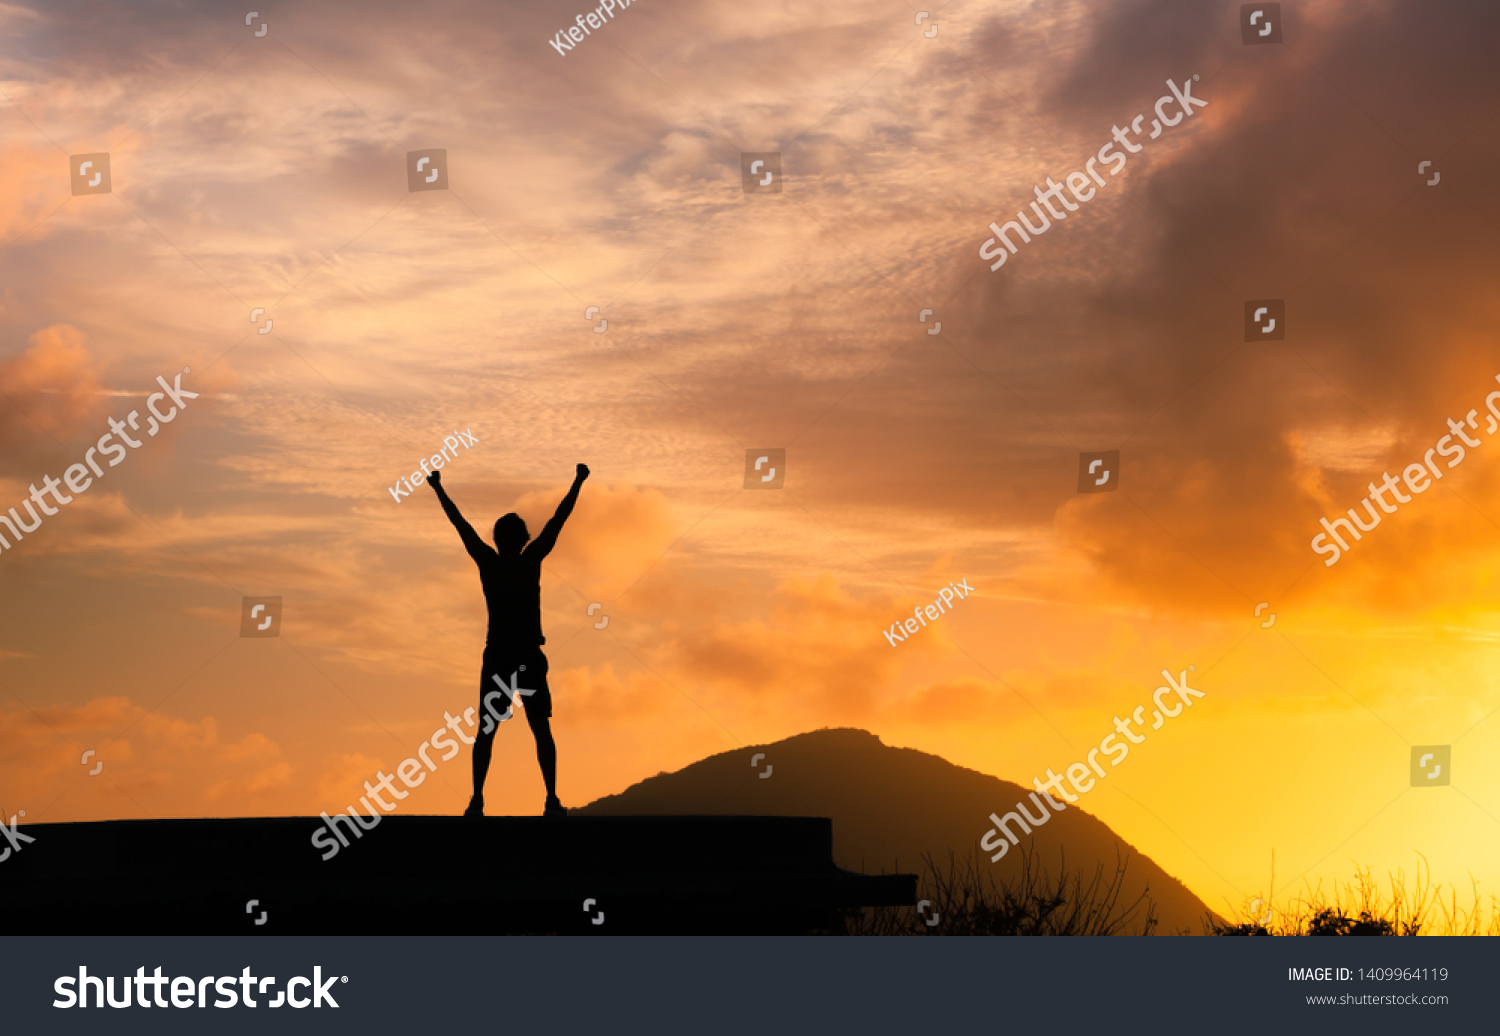 Strong man with fist in the air standing on top a mountain. Triumph, victory and feeling determined. #1409964119